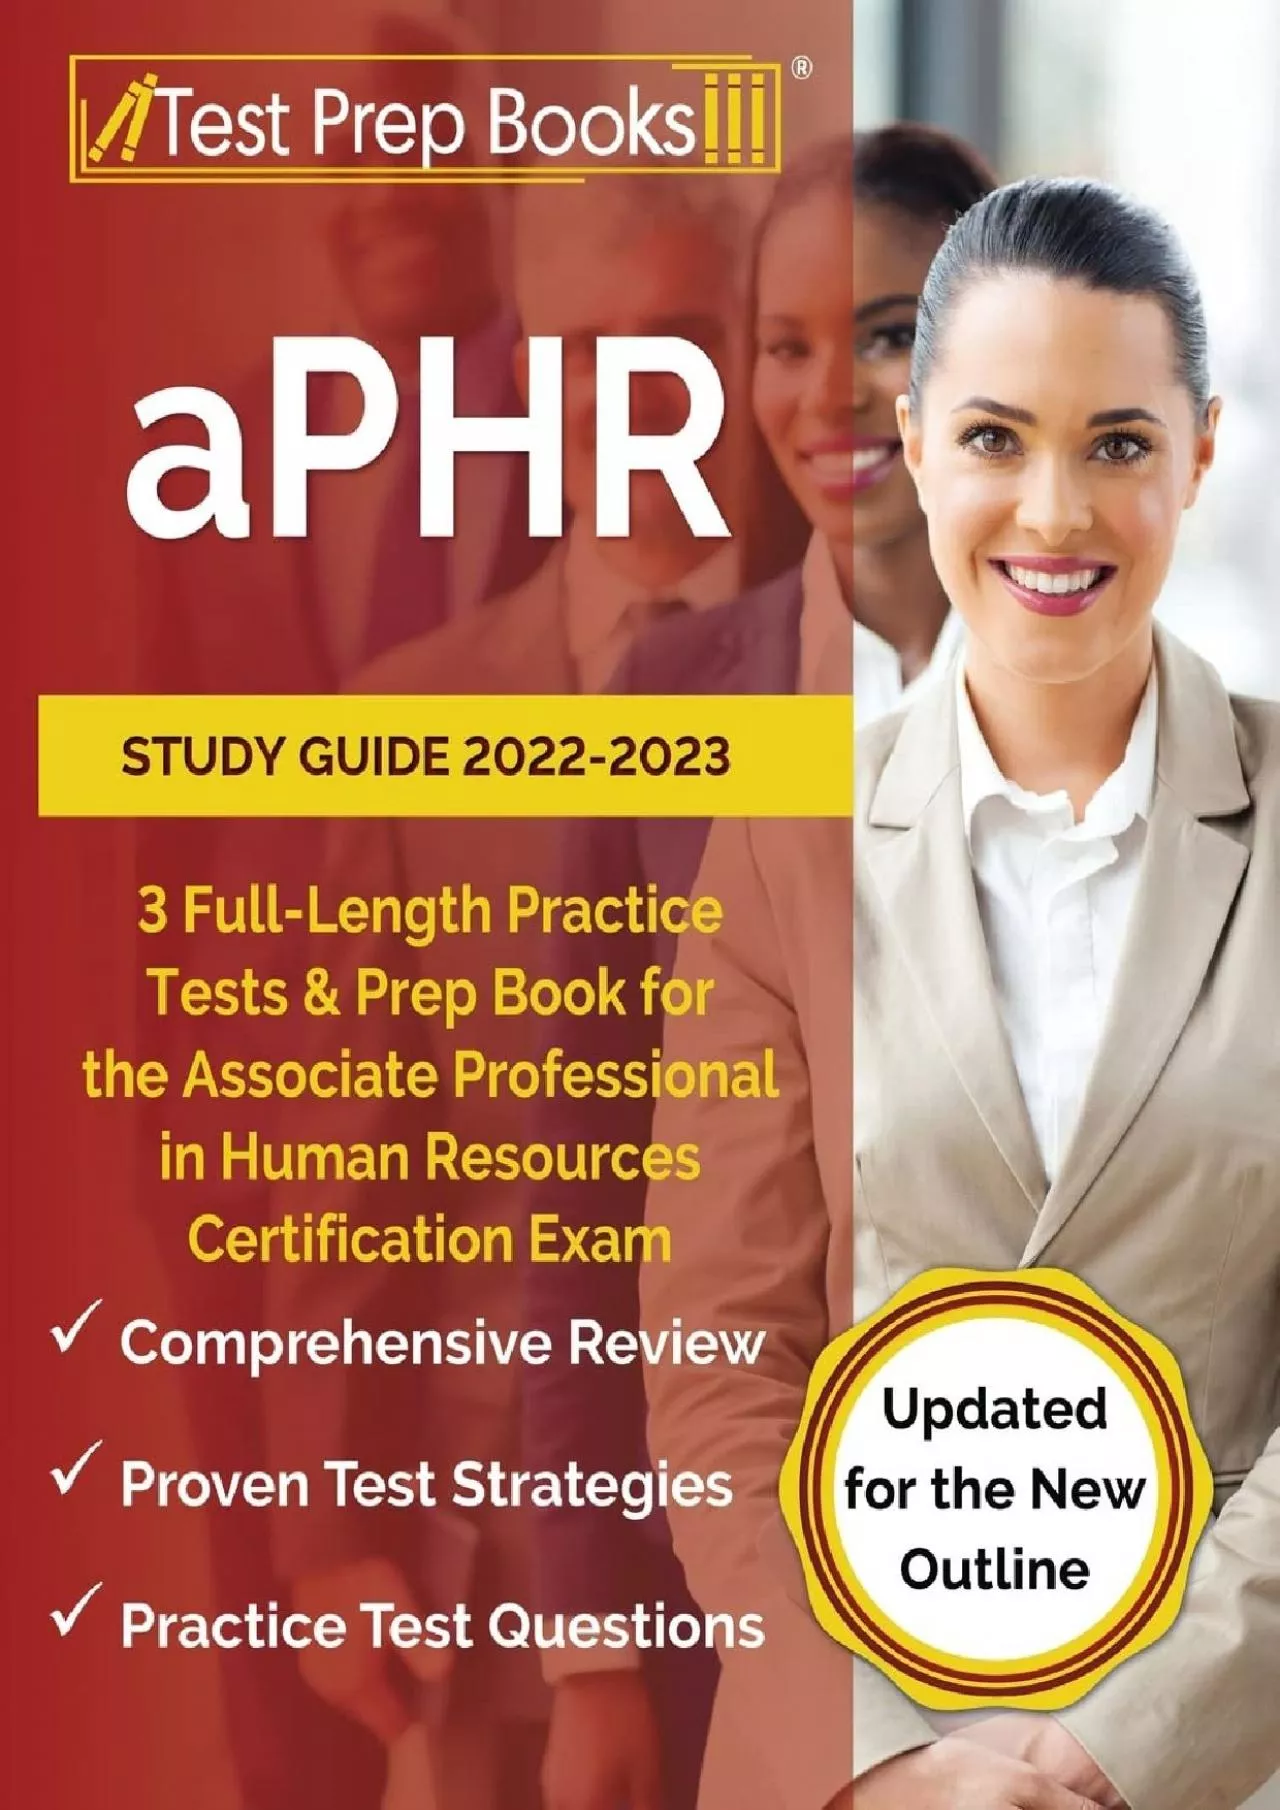 [DOWNLOAD] aPHR Study Guide 2022-2023: 3 Full-Length Practice Tests and Prep Book for